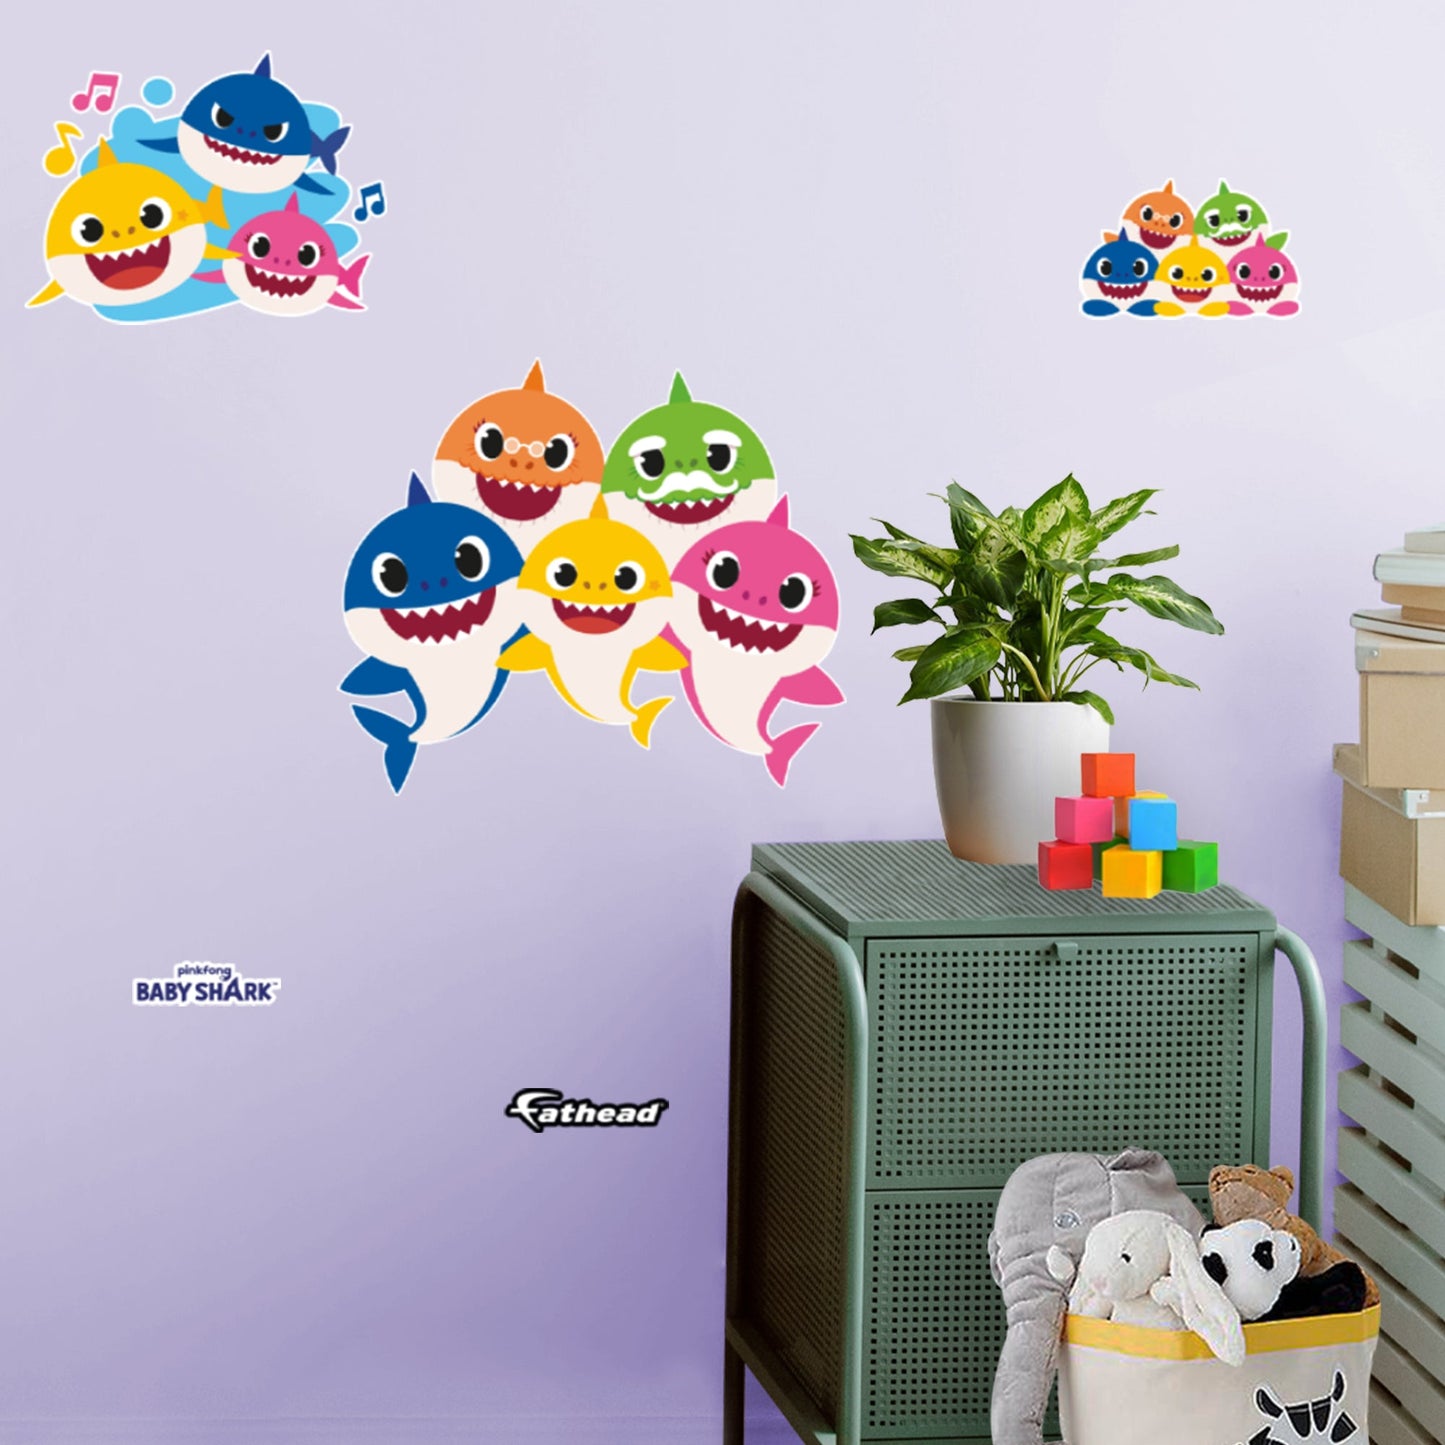 Baby Shark: Family RealBig - Officially Licensed Nickelodeon Removable Adhesive Decal